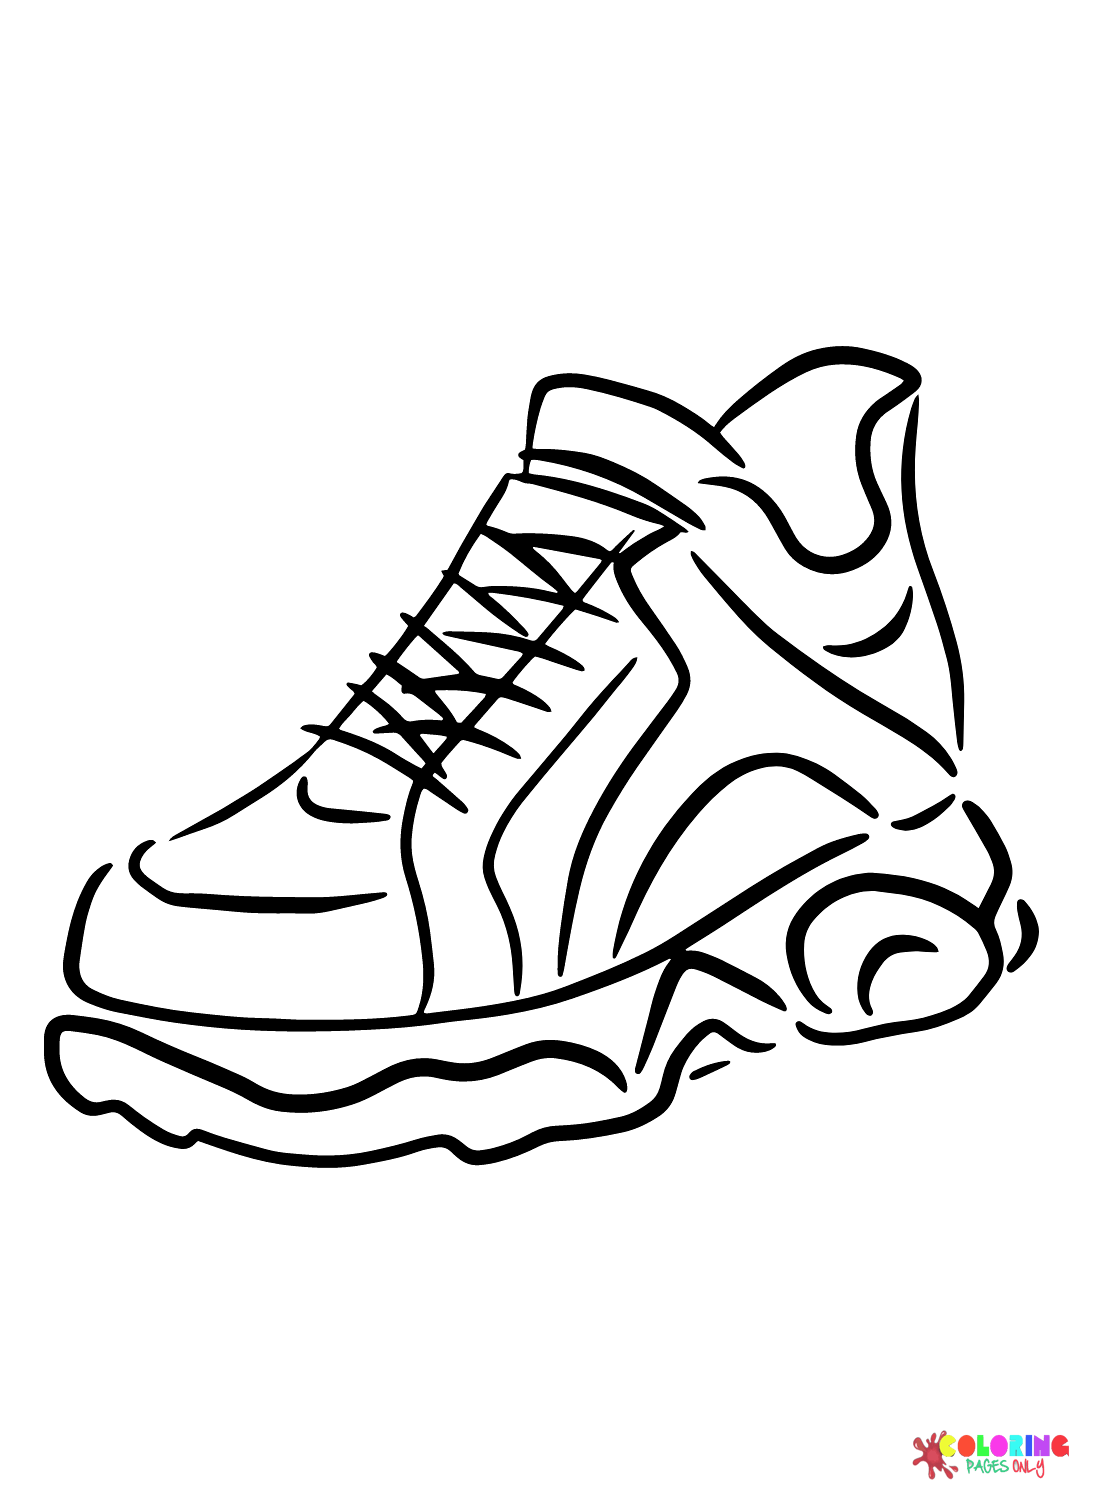 Free Sneaker Coloring Pages - Free Printable Coloring Pages